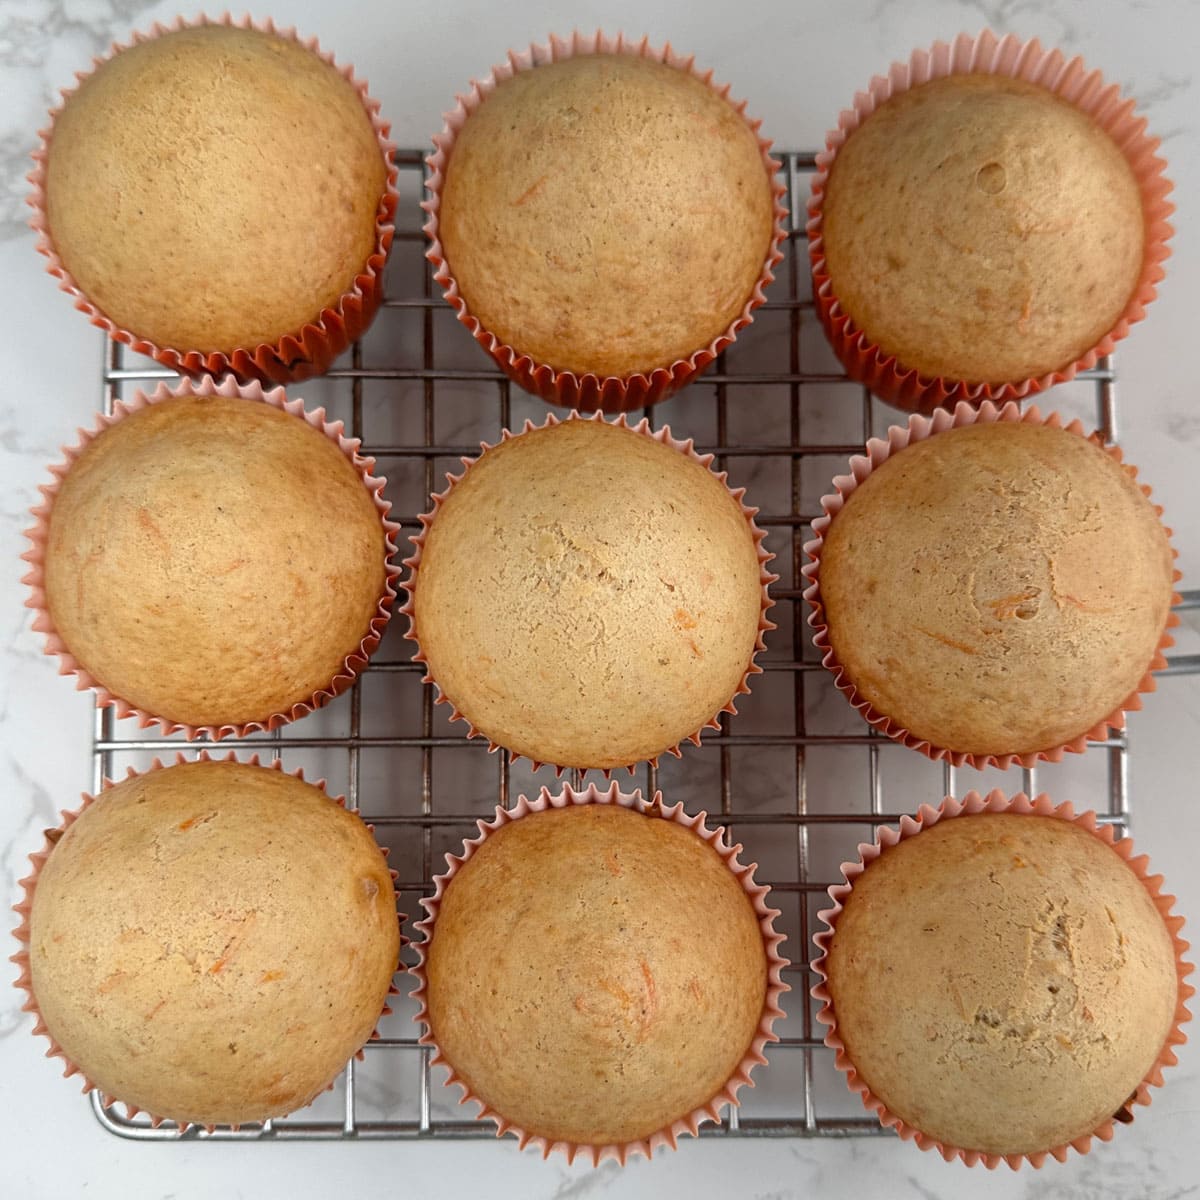 Carrot cupcakes on cooling rack.